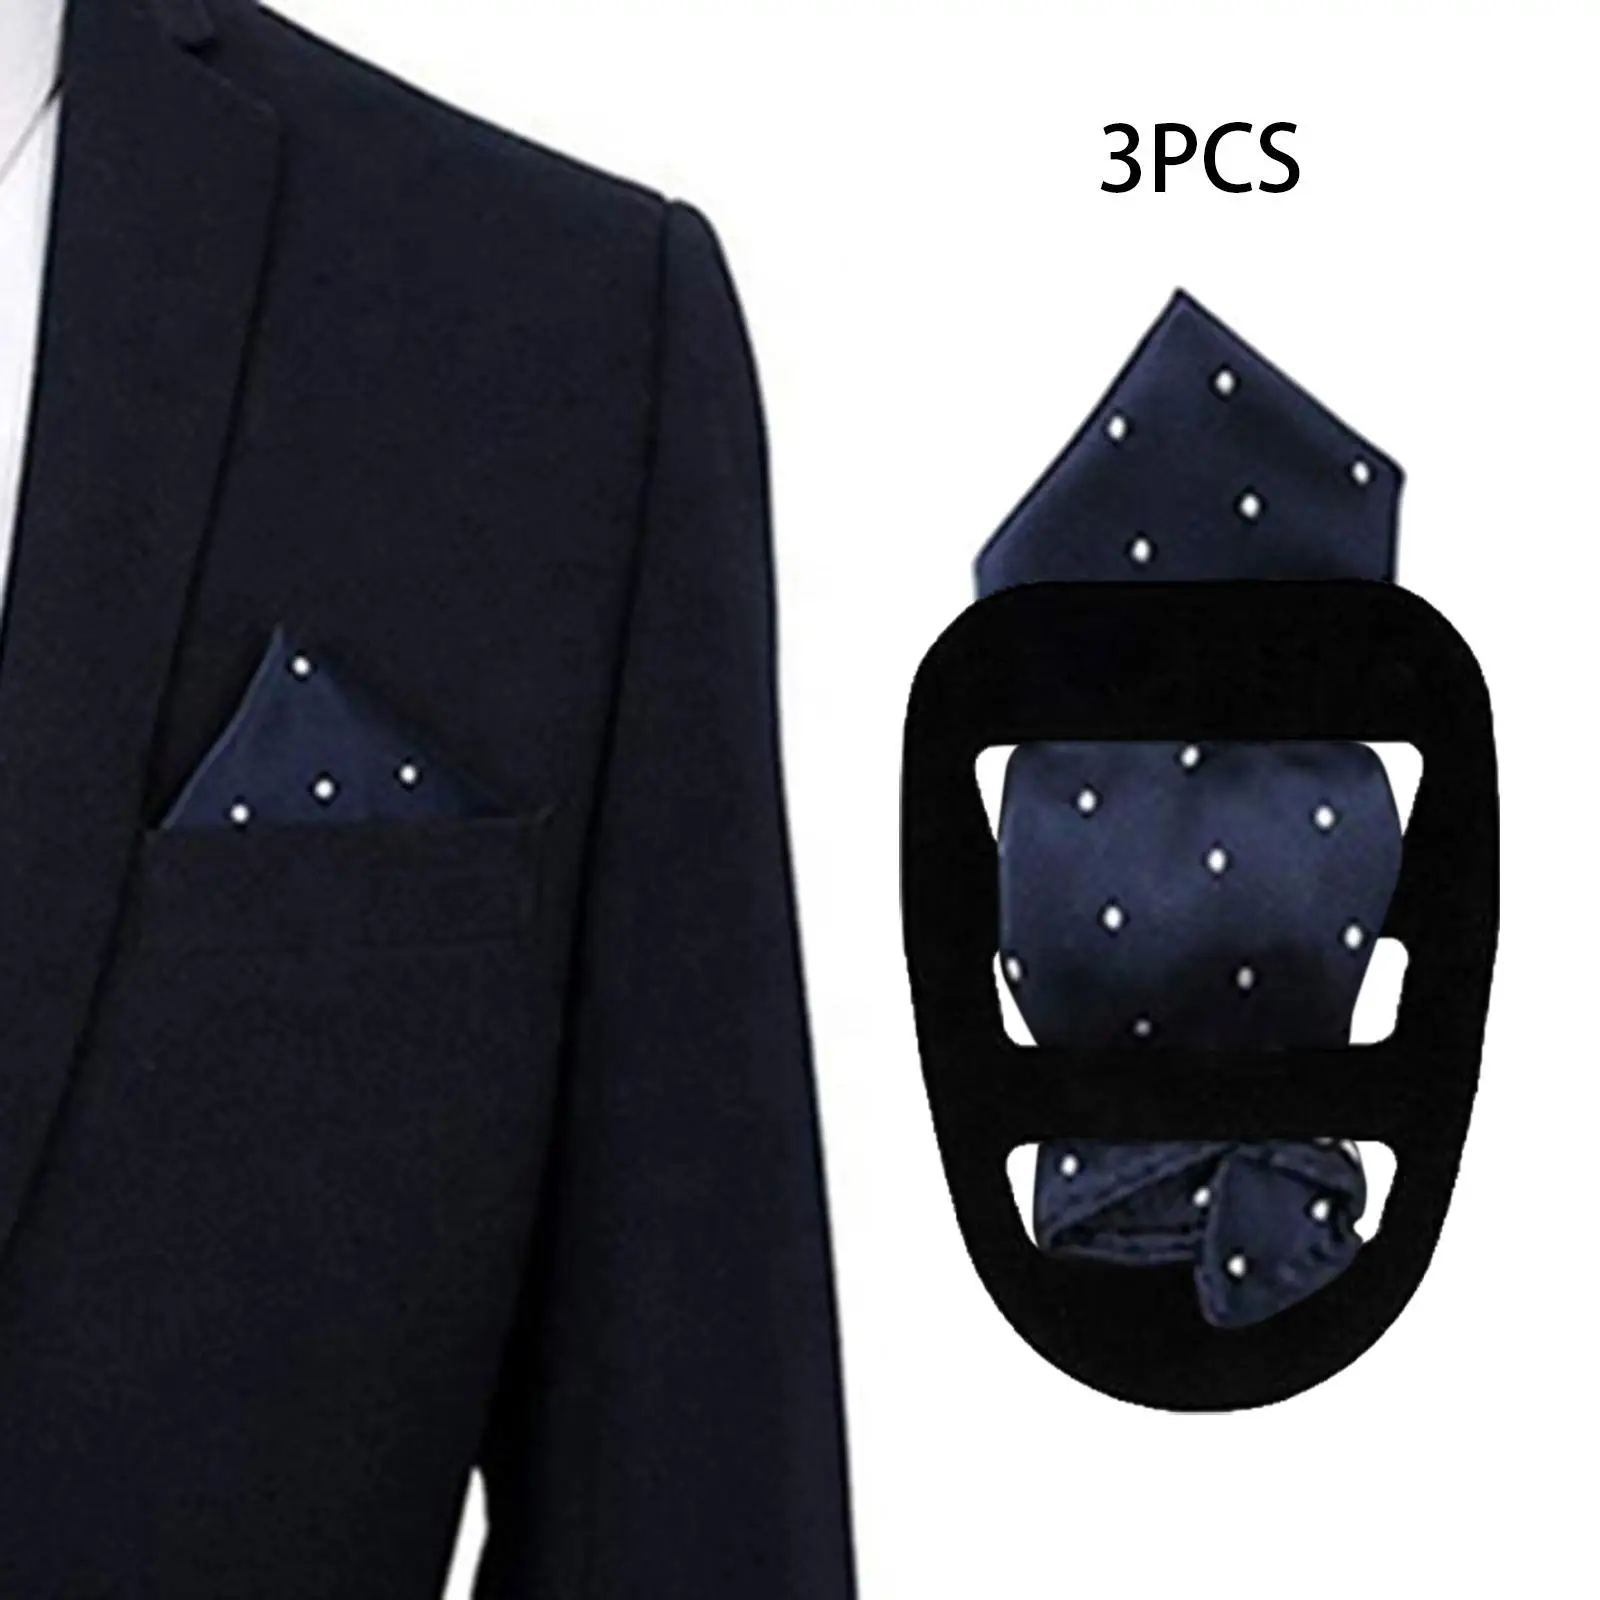 3Pcs Handkerchief Keeper Fixing Bracket Support Universal Square Scarf Holder for Mens suits Accessories Tuxedos Vests Jackets